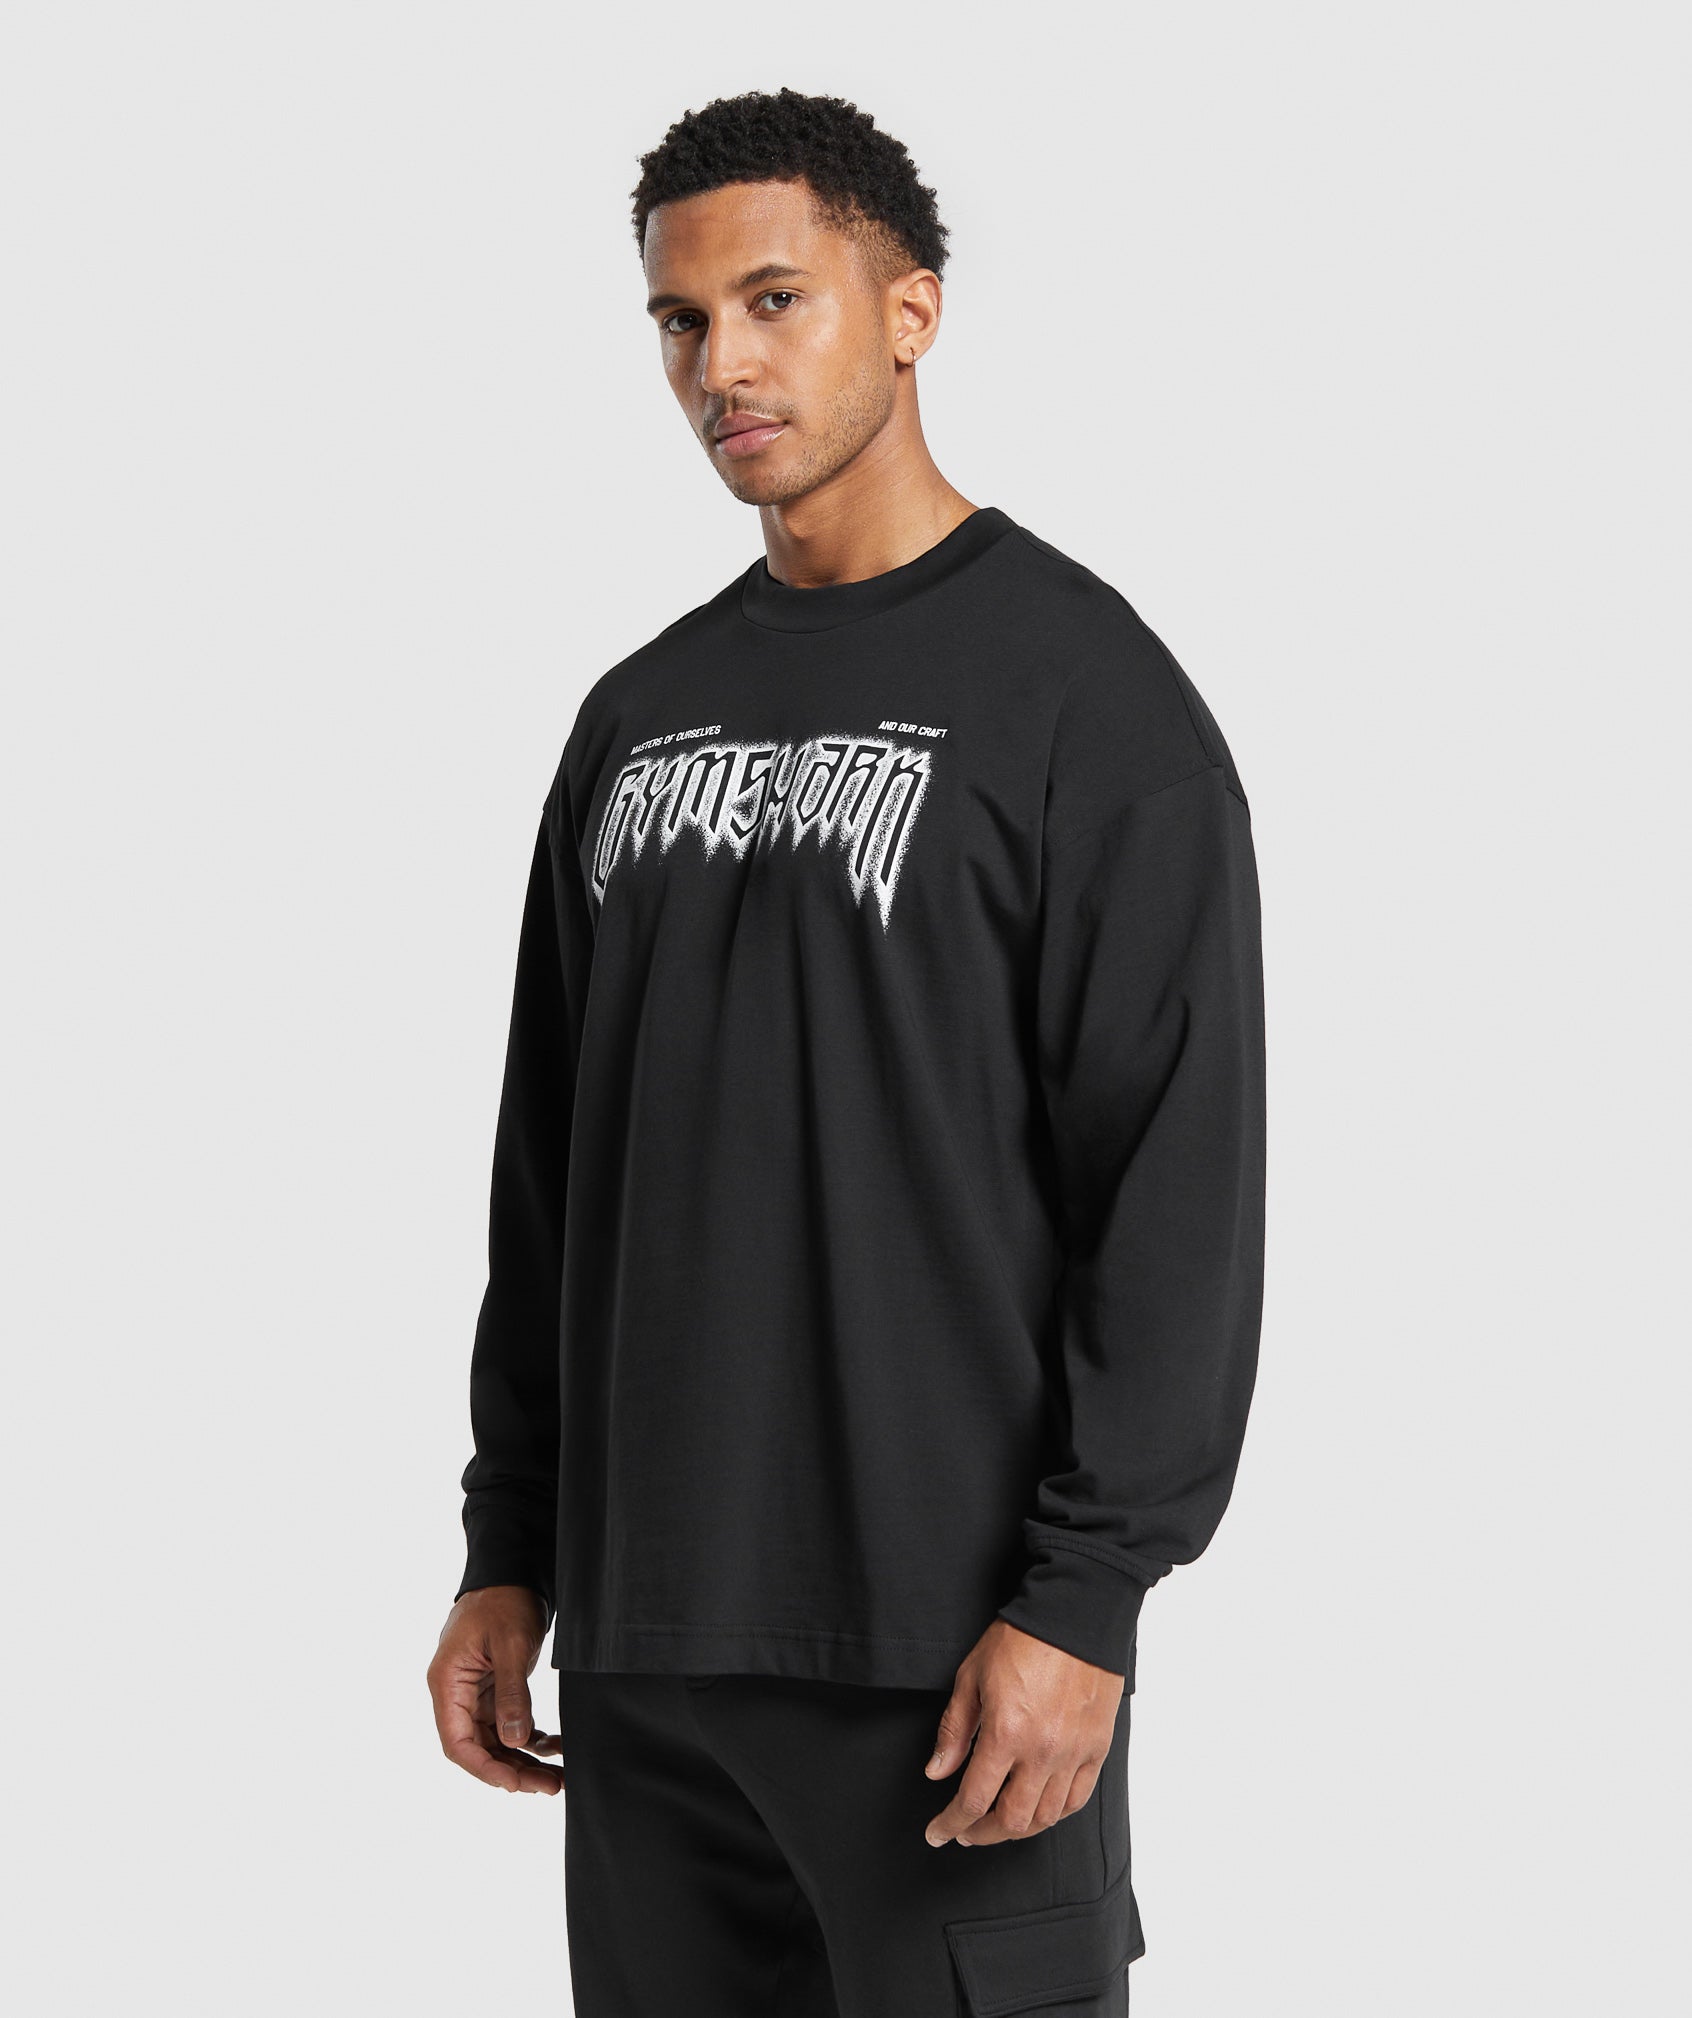 Masters of Our Craft Long Sleeve T-Shirt in Black - view 3